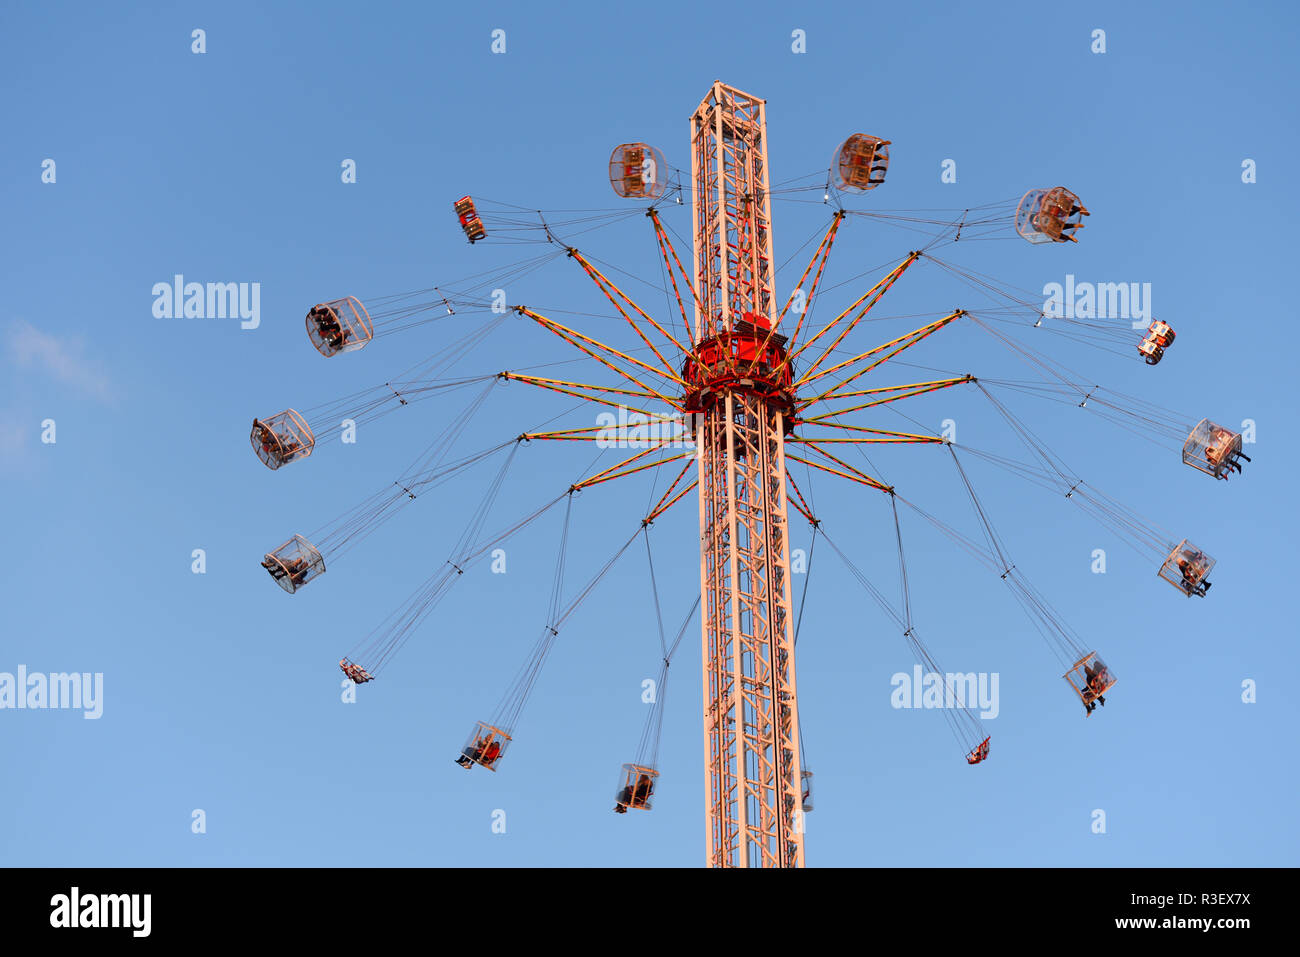 Around the World XXL flying swing ride at Jubilee Gardens South Bank  London. Thrill ride. Fairground ride with people in chairs hanging from  rotating Stock Photo - Alamy